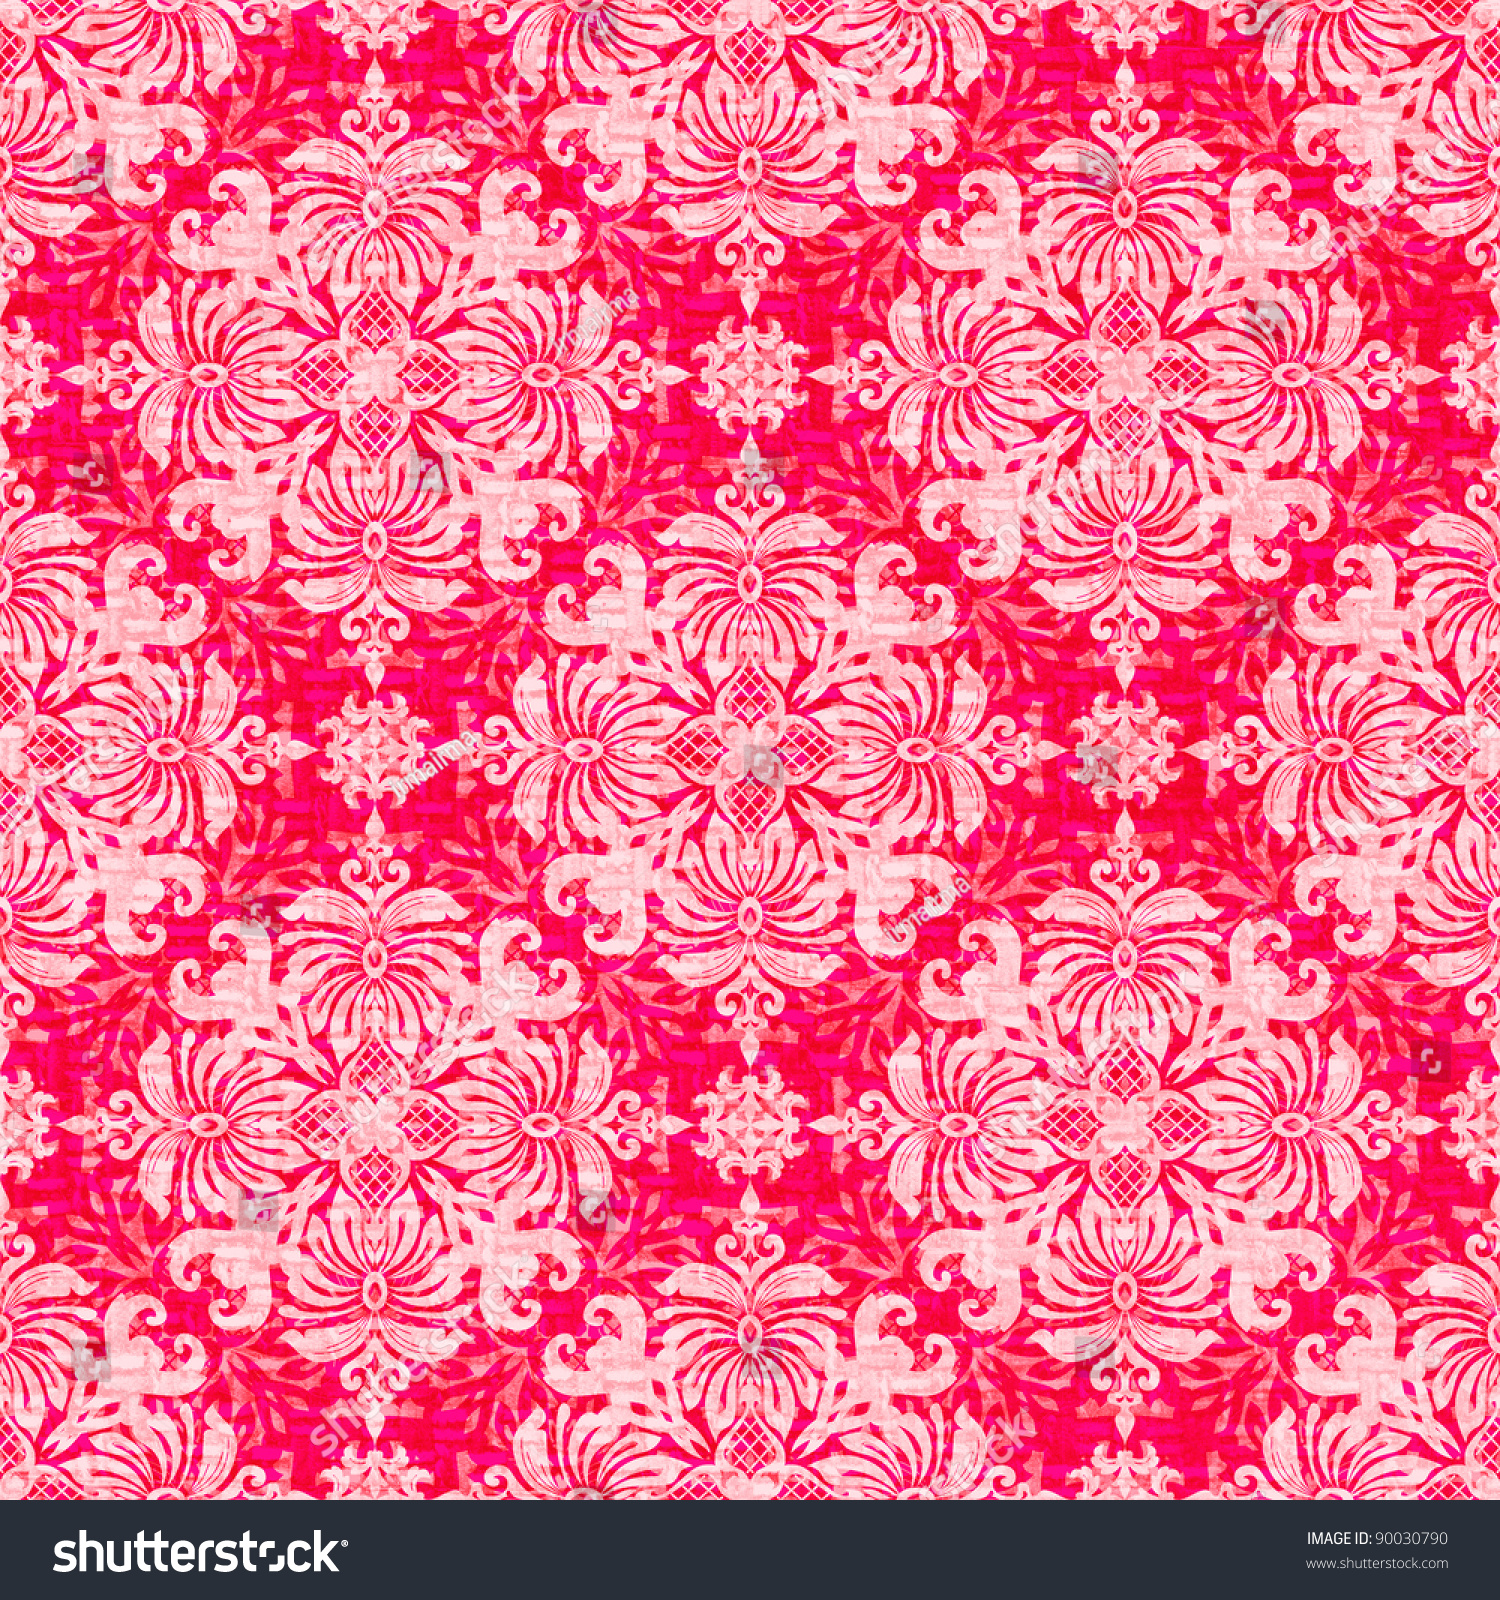 Vintage Classic Ornamental Seamless Wallpaper In Red And Pink Stock ...